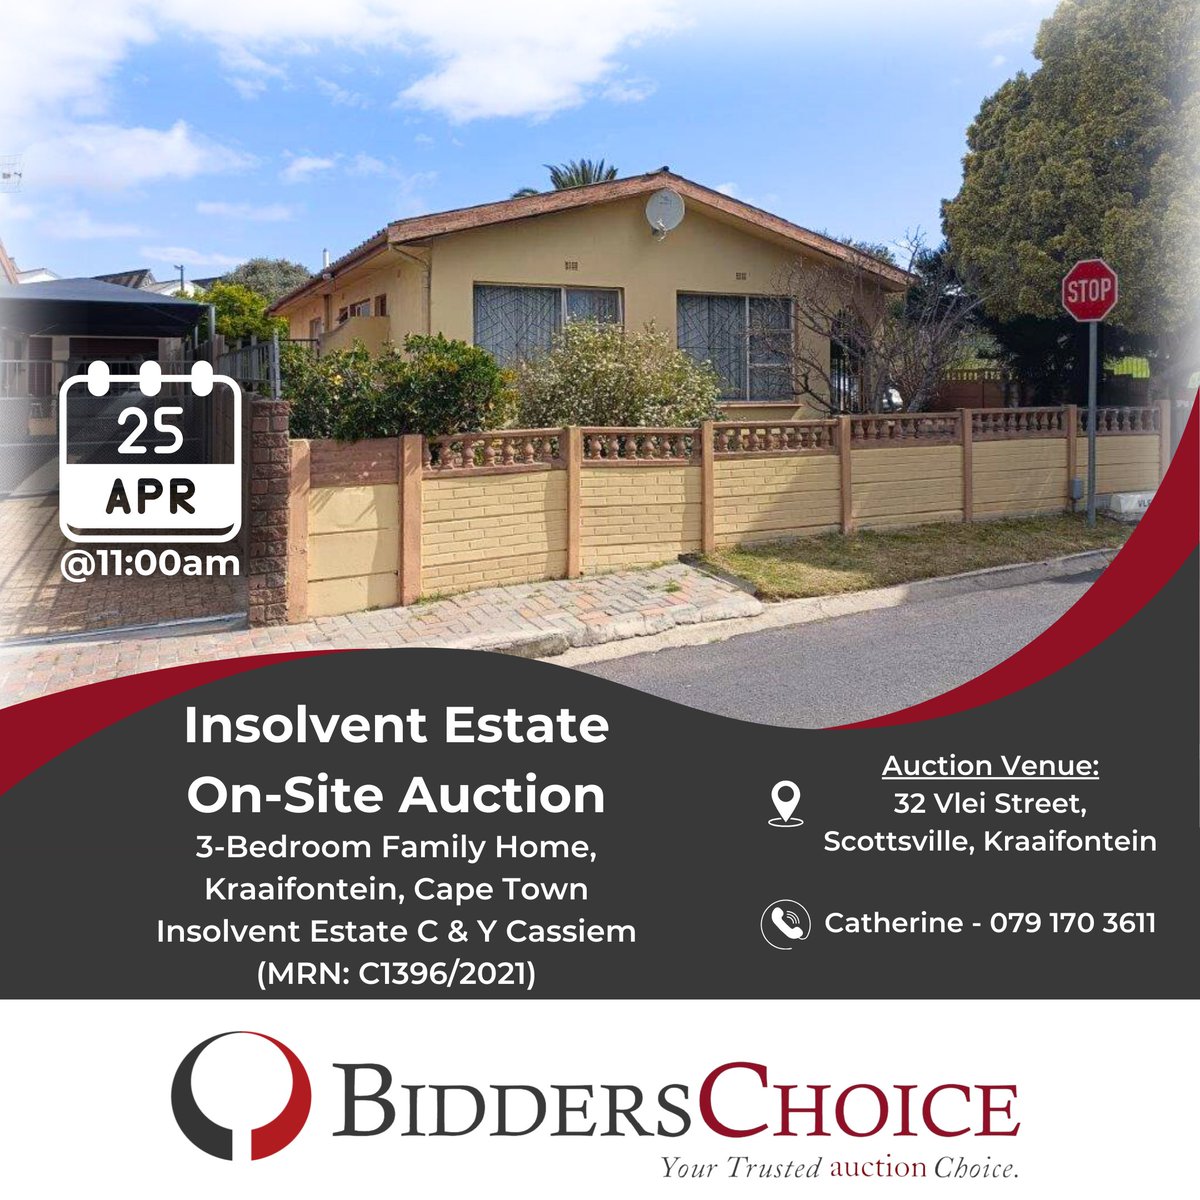 On-Site Insolvent Estate Auction: 3-Bedroom Family Home, Kraaifontein 

📍 32 Vlei Street, Scottsville, Kraaifontein

Viewing: By Appointment Only 

❗ Auction: 25 April 2024 at 11:00 

🔗 For more information visit: 
bidderschoice.co.za/property-listi…

#auction #propertyauction #property